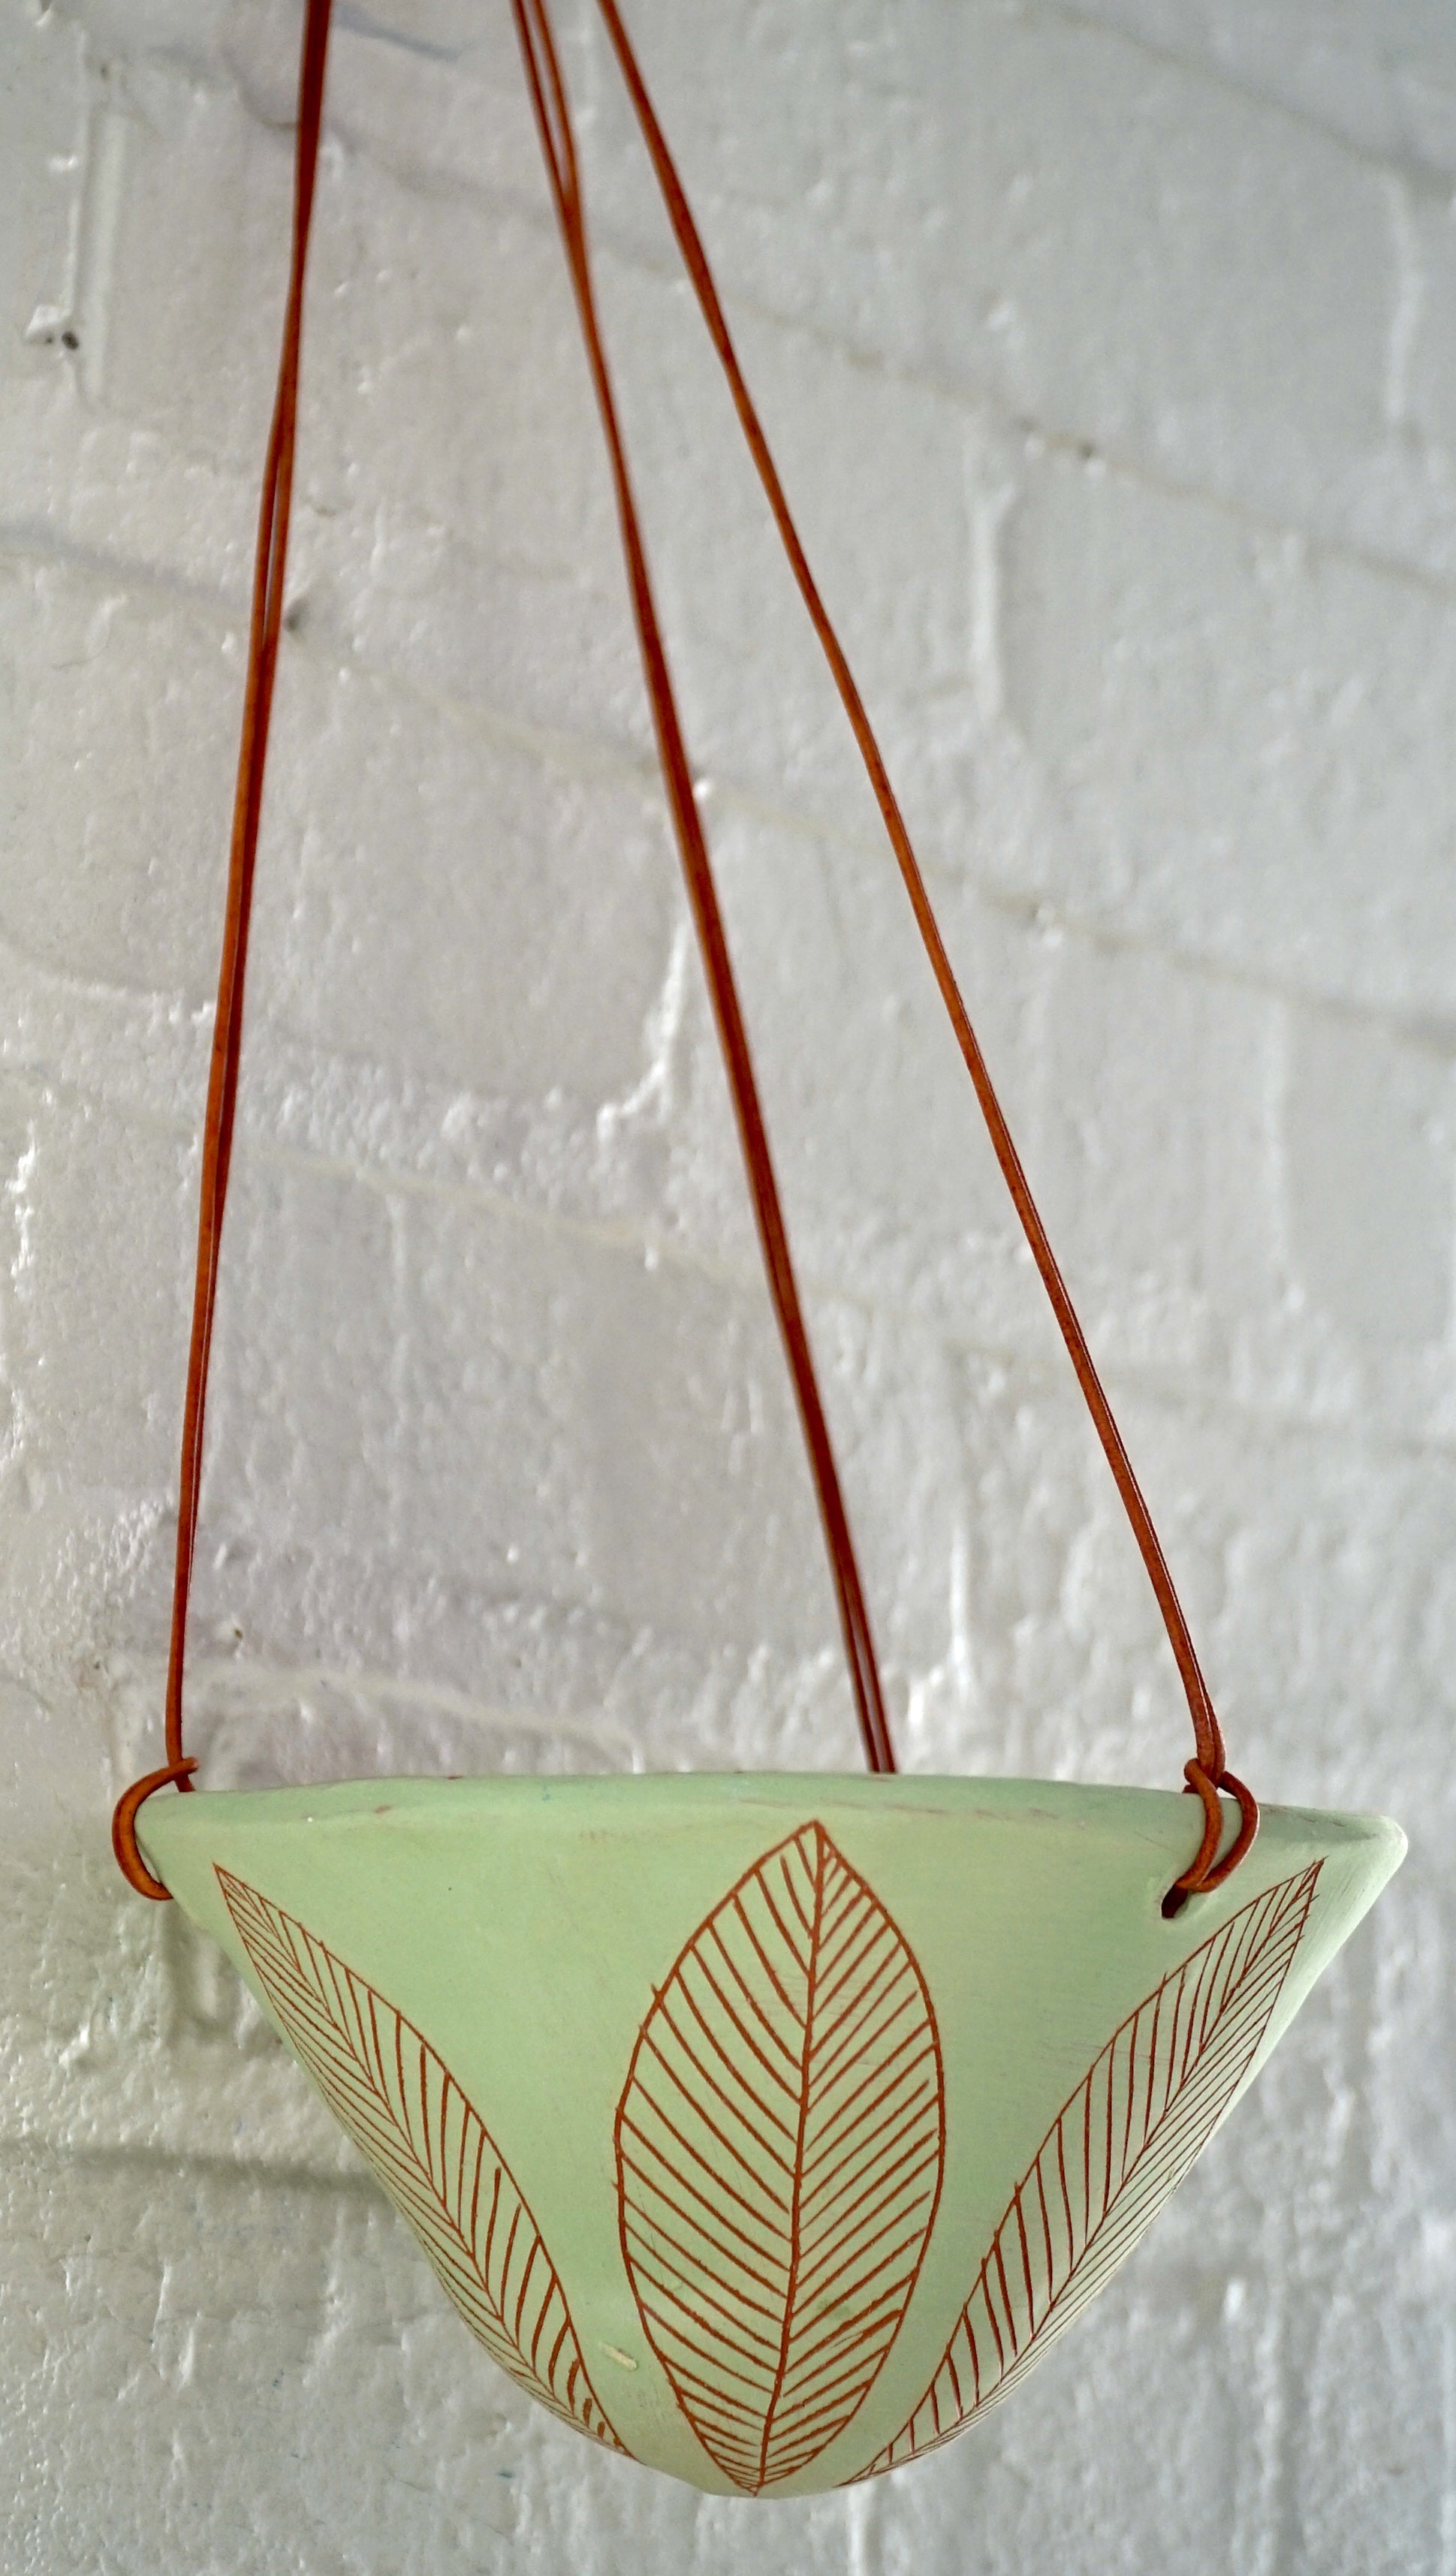 Light Green & Terracotta Hanging Planter w/ "Leaf" Design - Pale Green Hanging Pot with Carved Design - Succulent, Cactus, Herb, Air Plant